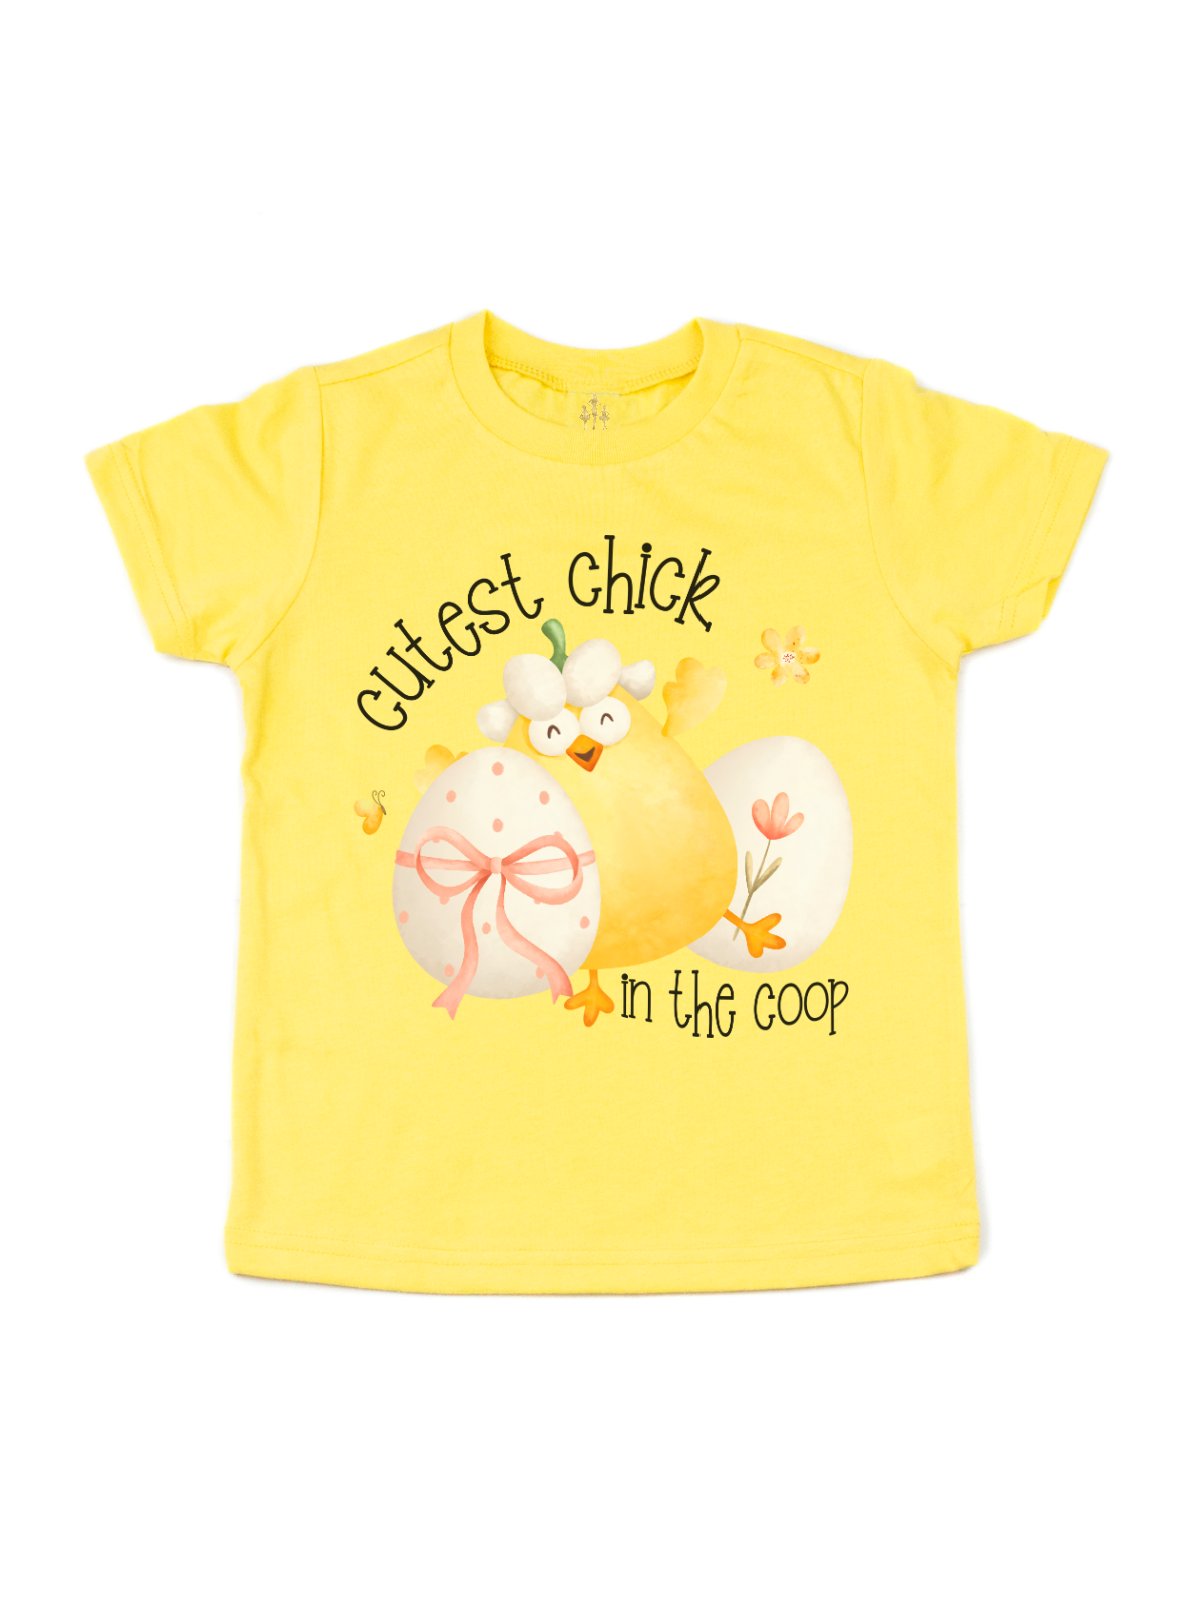 Cutest Chick in the Coop Girls Easter Shirt